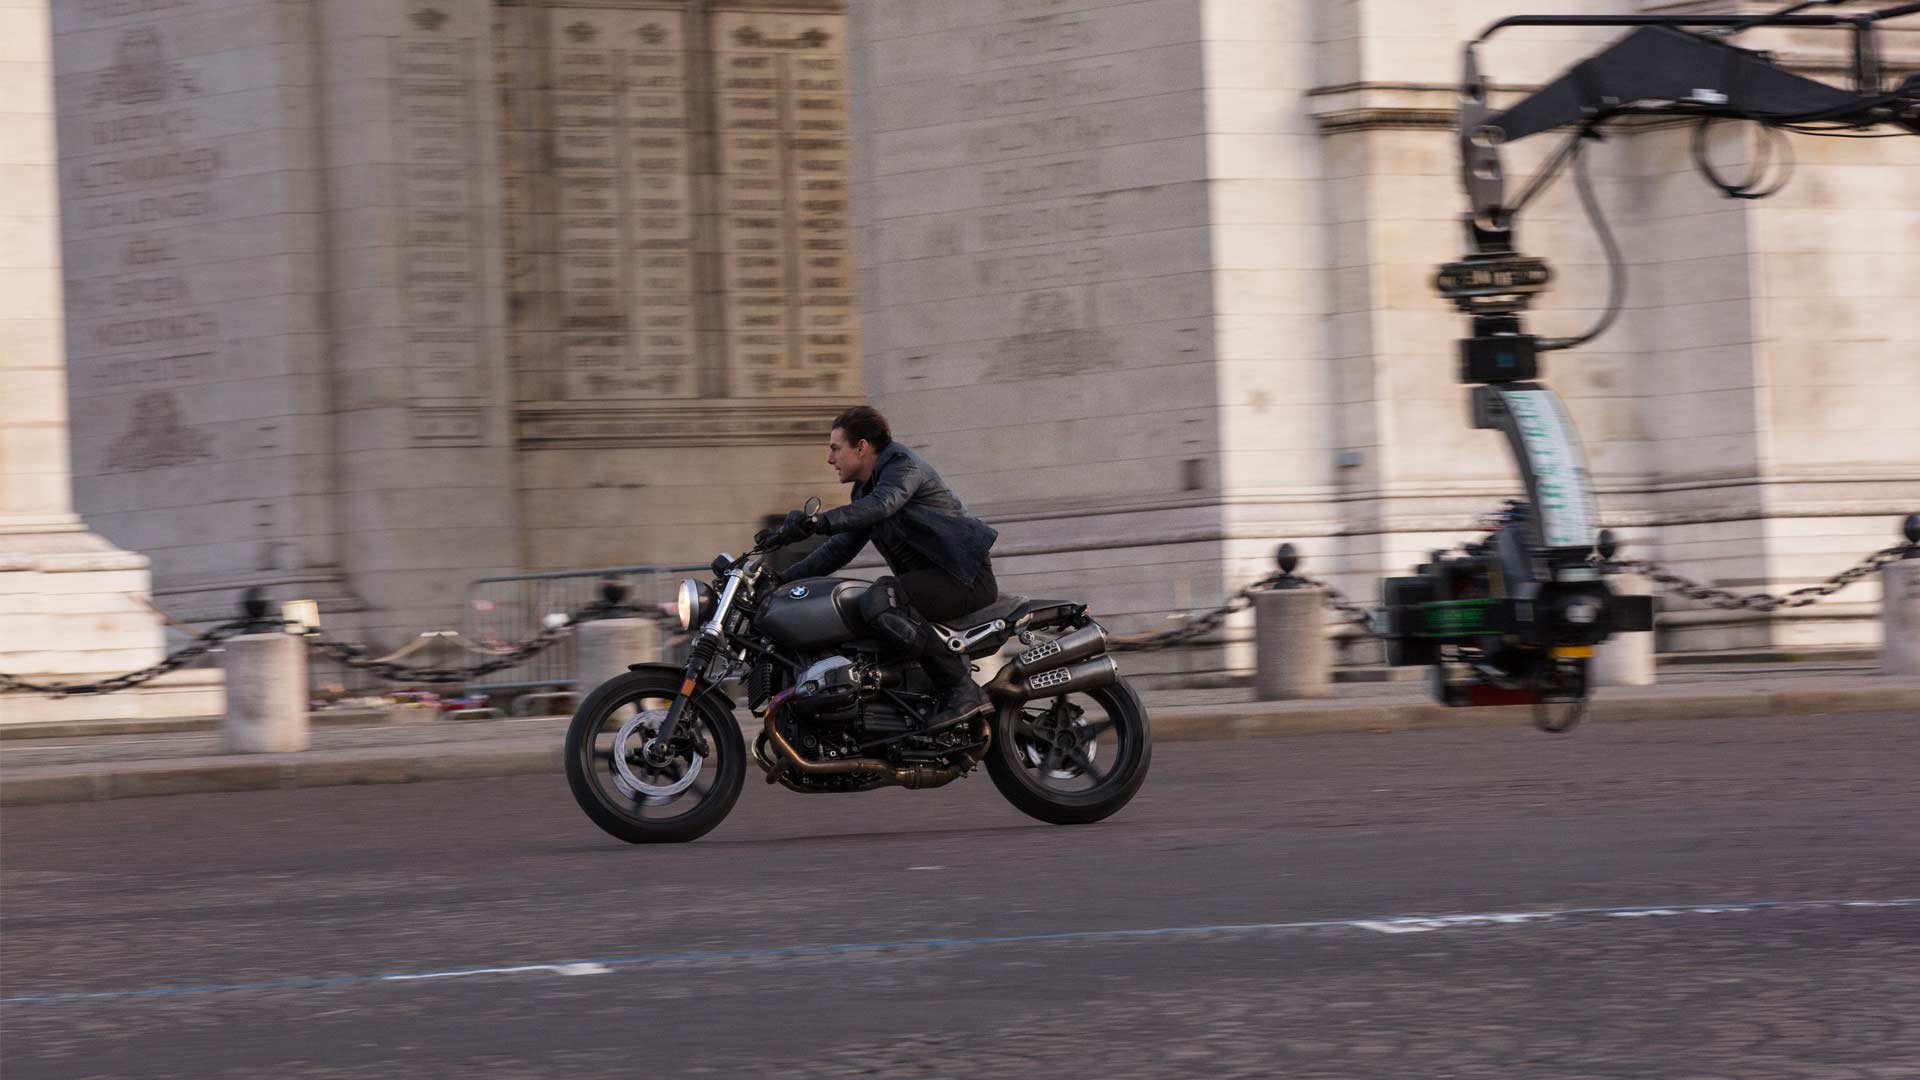 BMW-R-nineT-Scrambler-Tom-Cruise-Mission-Impossible-Fallout